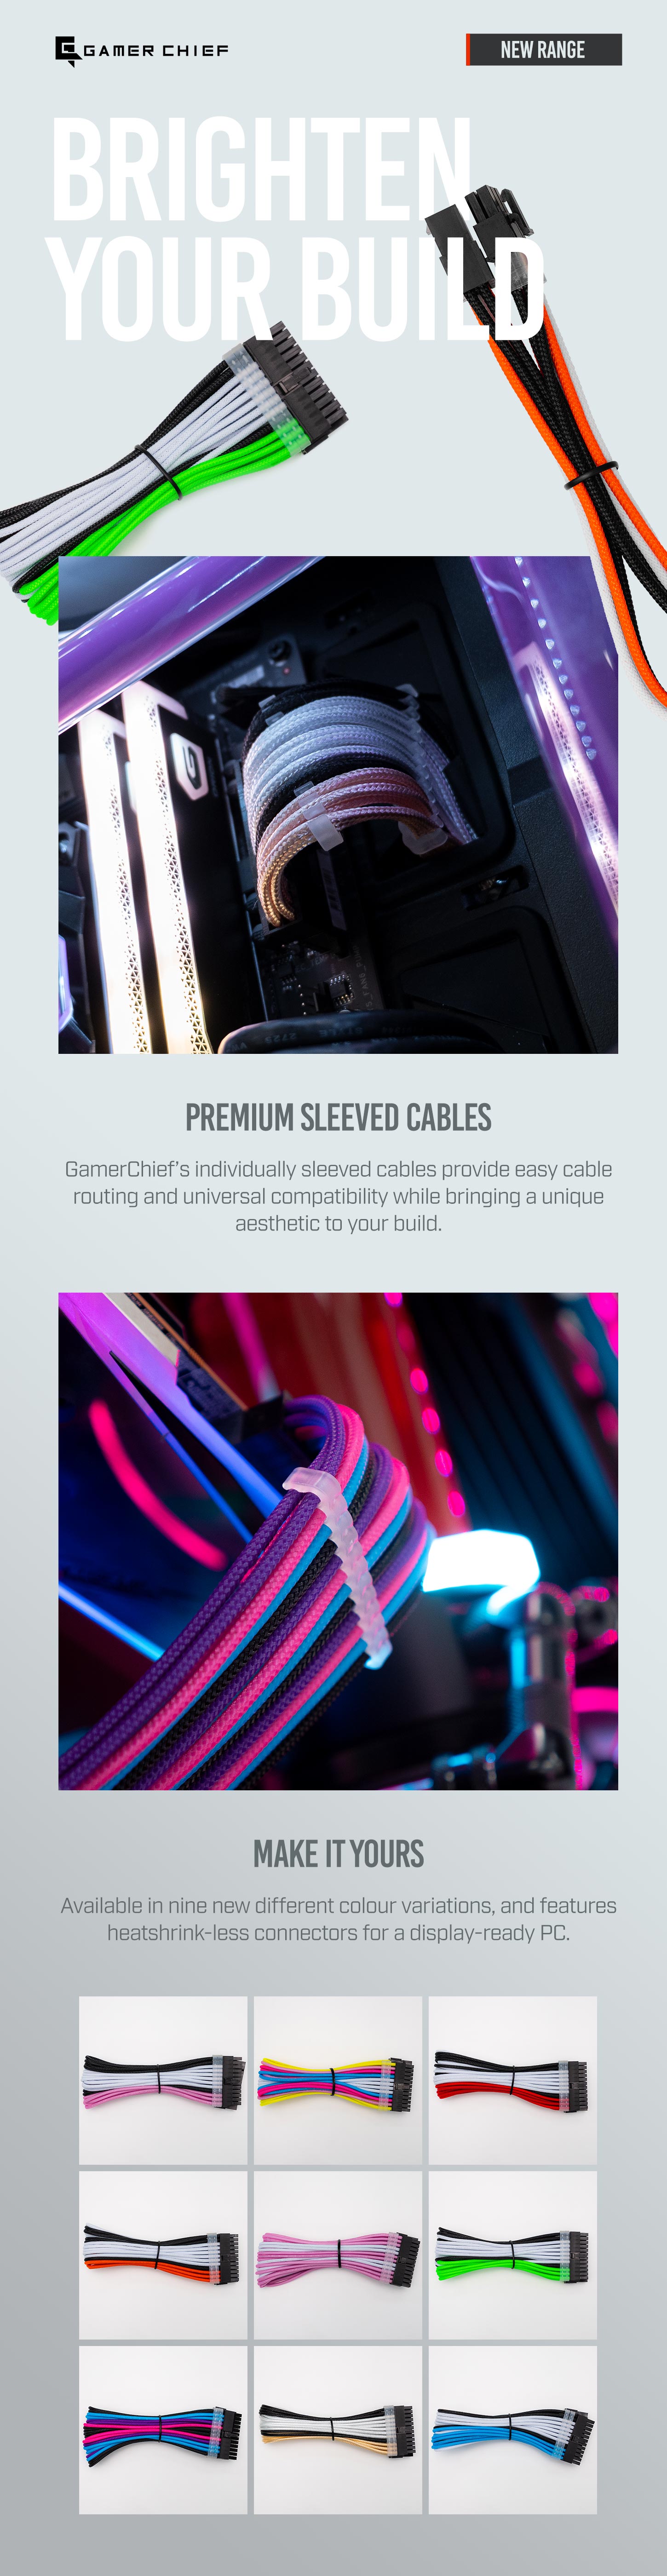 A large marketing image providing additional information about the product GamerChief Elite Series 24-Pin ATX 30cm Sleeved Extension Cable (Green/White/Black) - Additional alt info not provided